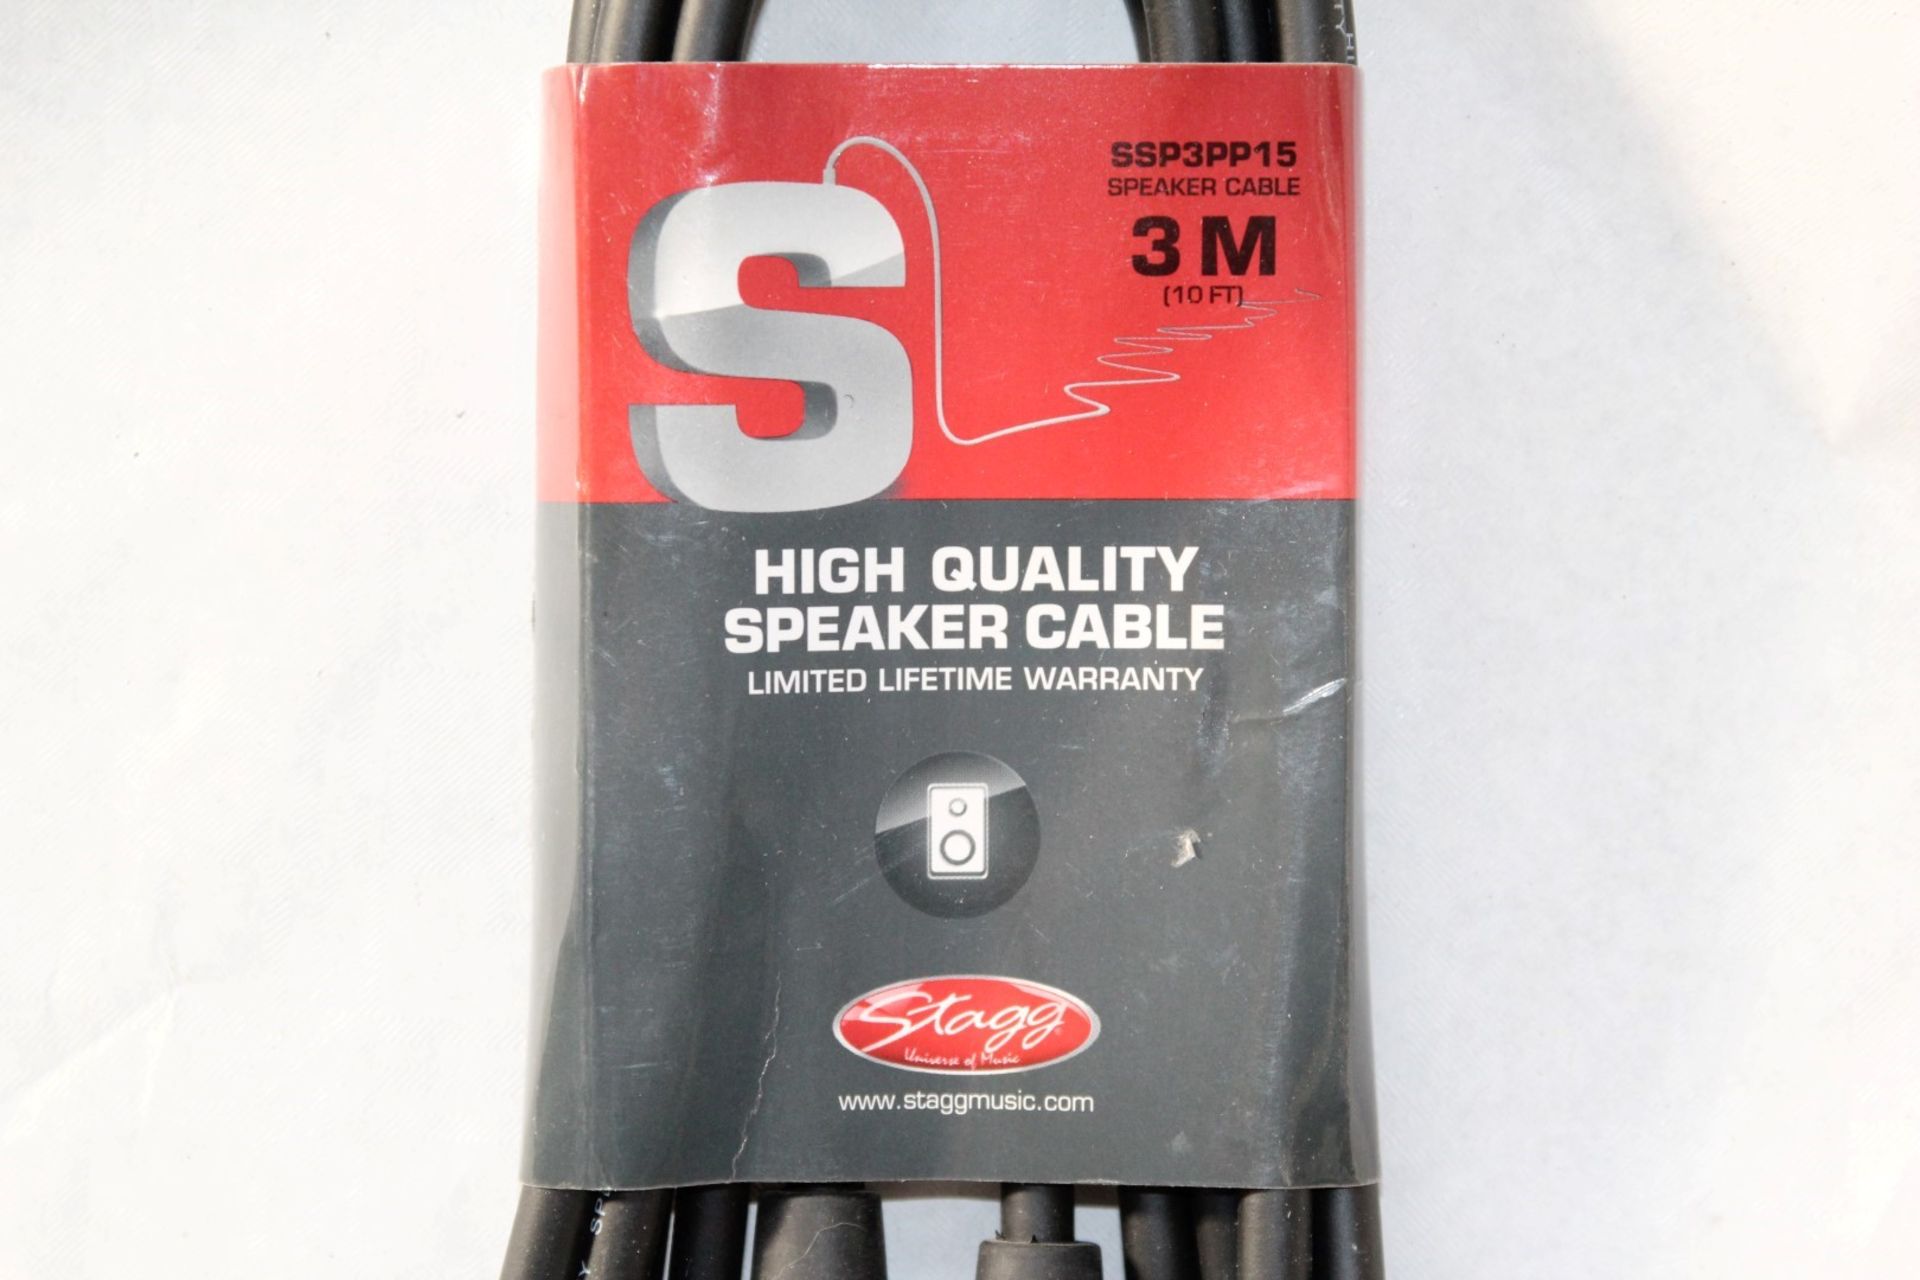 4 x Stagg 3 Metre High Quality Speaker Cables - Jack to Jack - Product Code SSP3PP15 - Brand New - Image 2 of 2